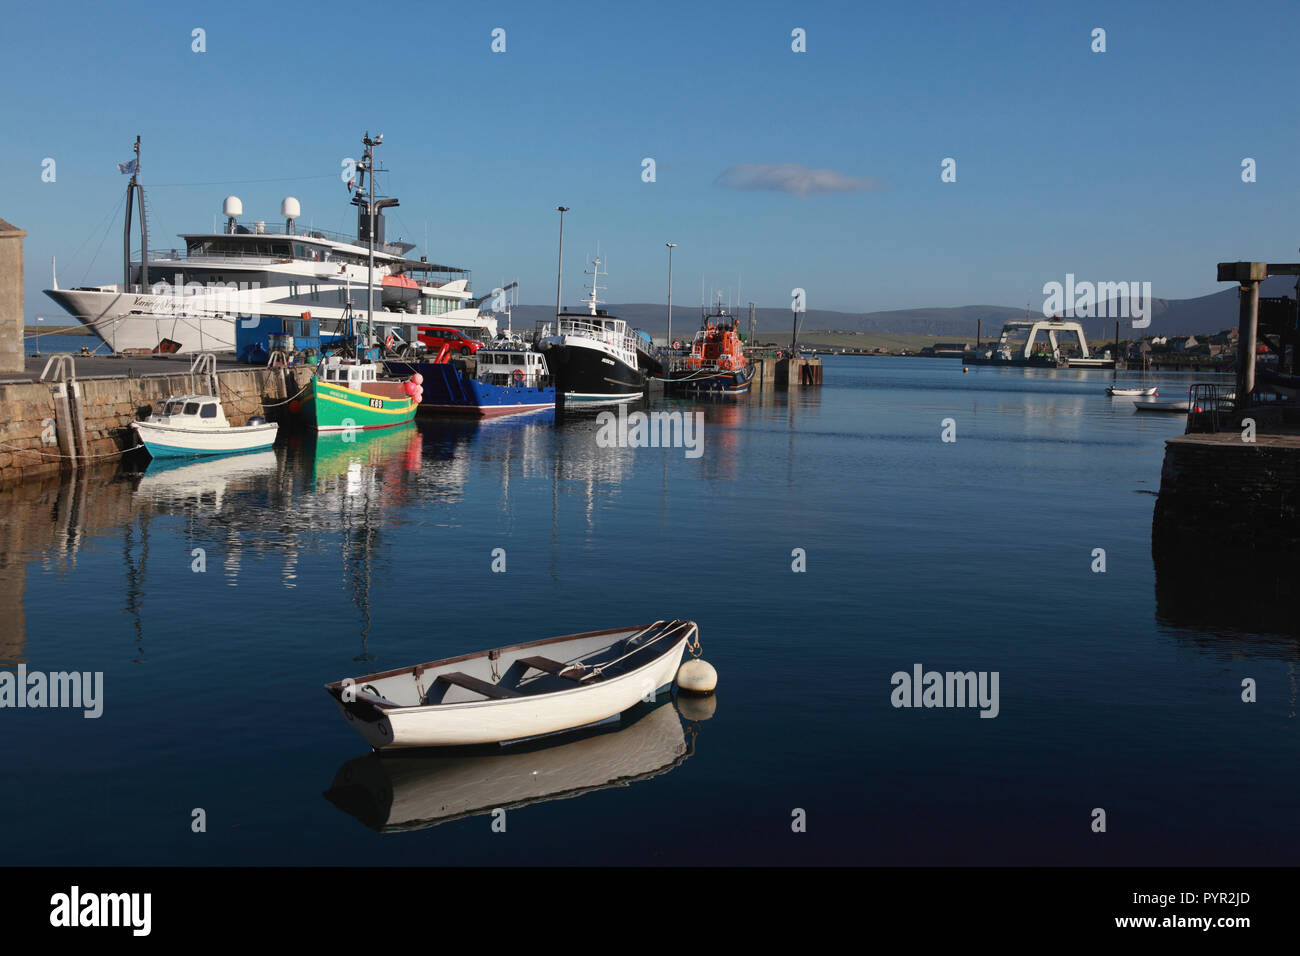 The harbour in Stromness, Orkney with fishing boats, the lifeboat and the passenger cruise ship, Variety Voyager Stock Photo